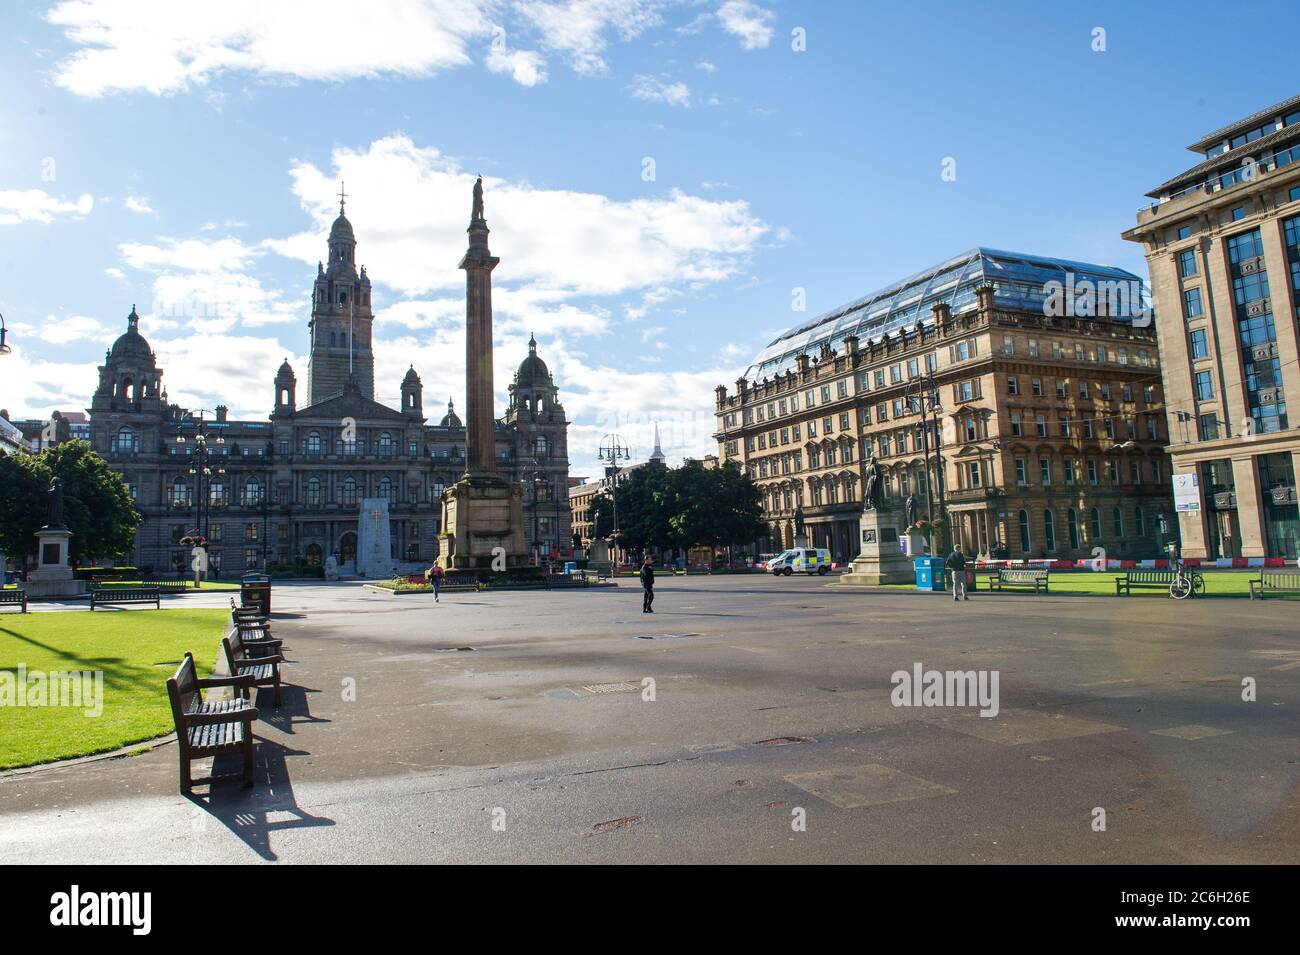 Glasgow, Scotland, UK. 10 July 2020. Pictured: George Square in Glasgow still shows signs of overnight showers, however the weather is to be bright sunshine on the day that Scotland makes all face coverings in shops mandatory.Glasgow, Scotland. Credit: Colin Fisher/Alamy Live News. Stock Photo